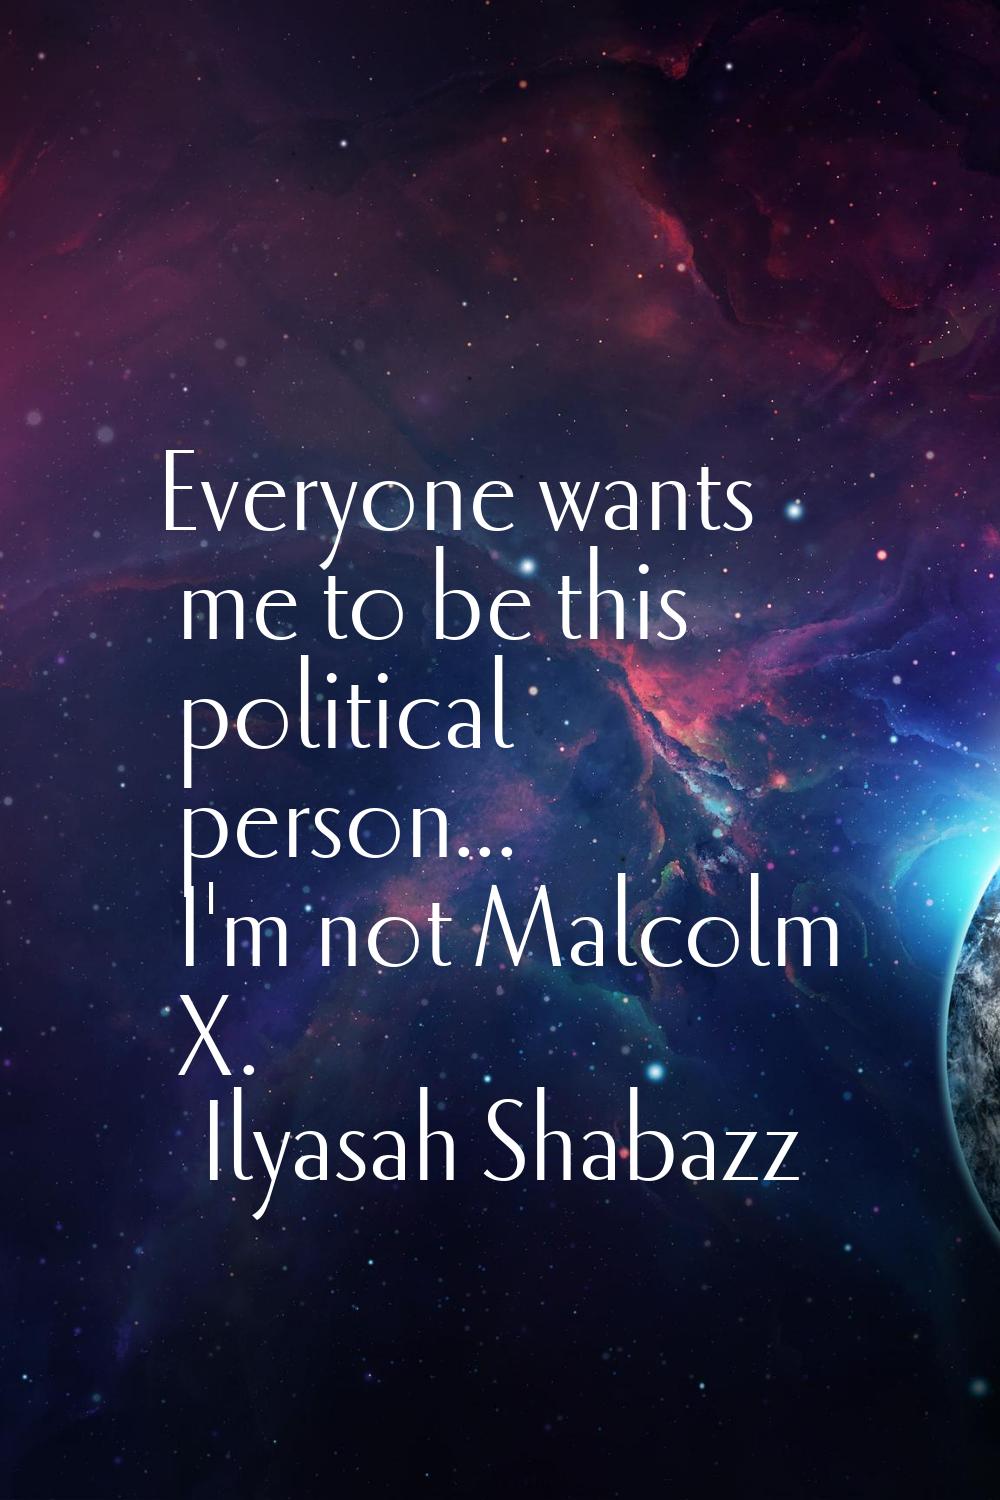 Everyone wants me to be this political person... I'm not Malcolm X.